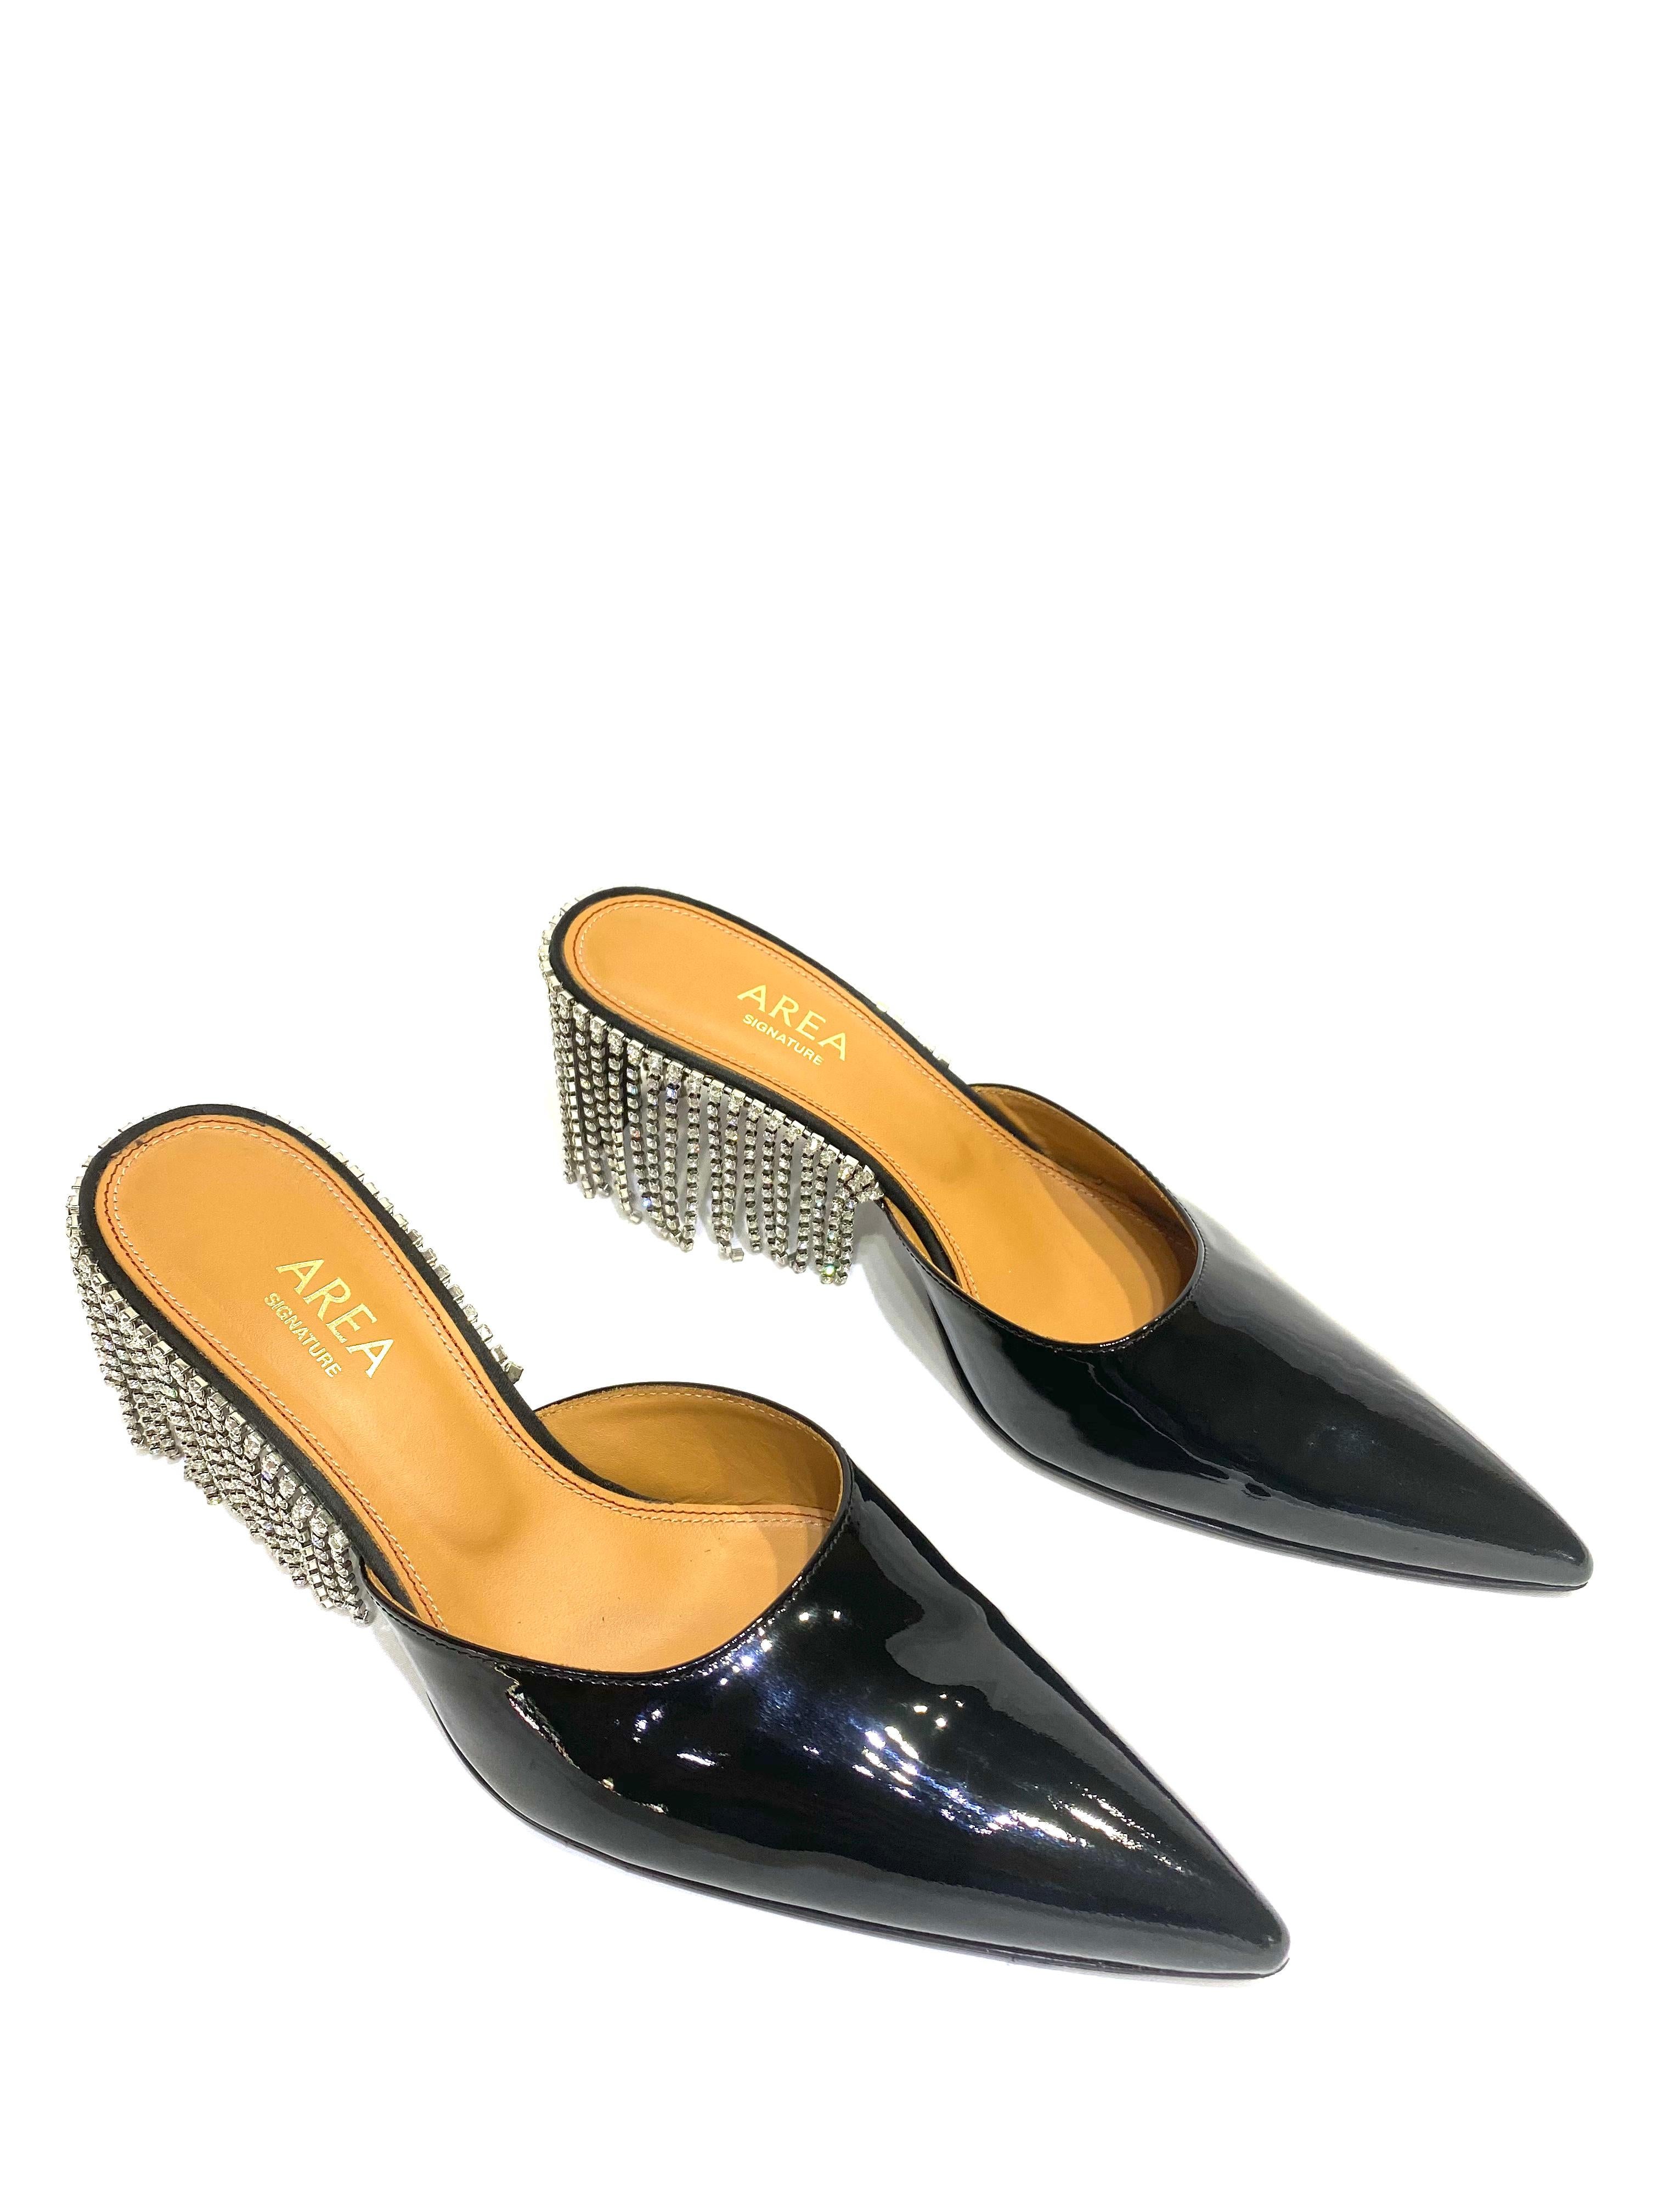 Product details:

Featuring black calfskin leather with patient finish, crystal fringe, pointed toe, kitten heel.
Made in Italy.